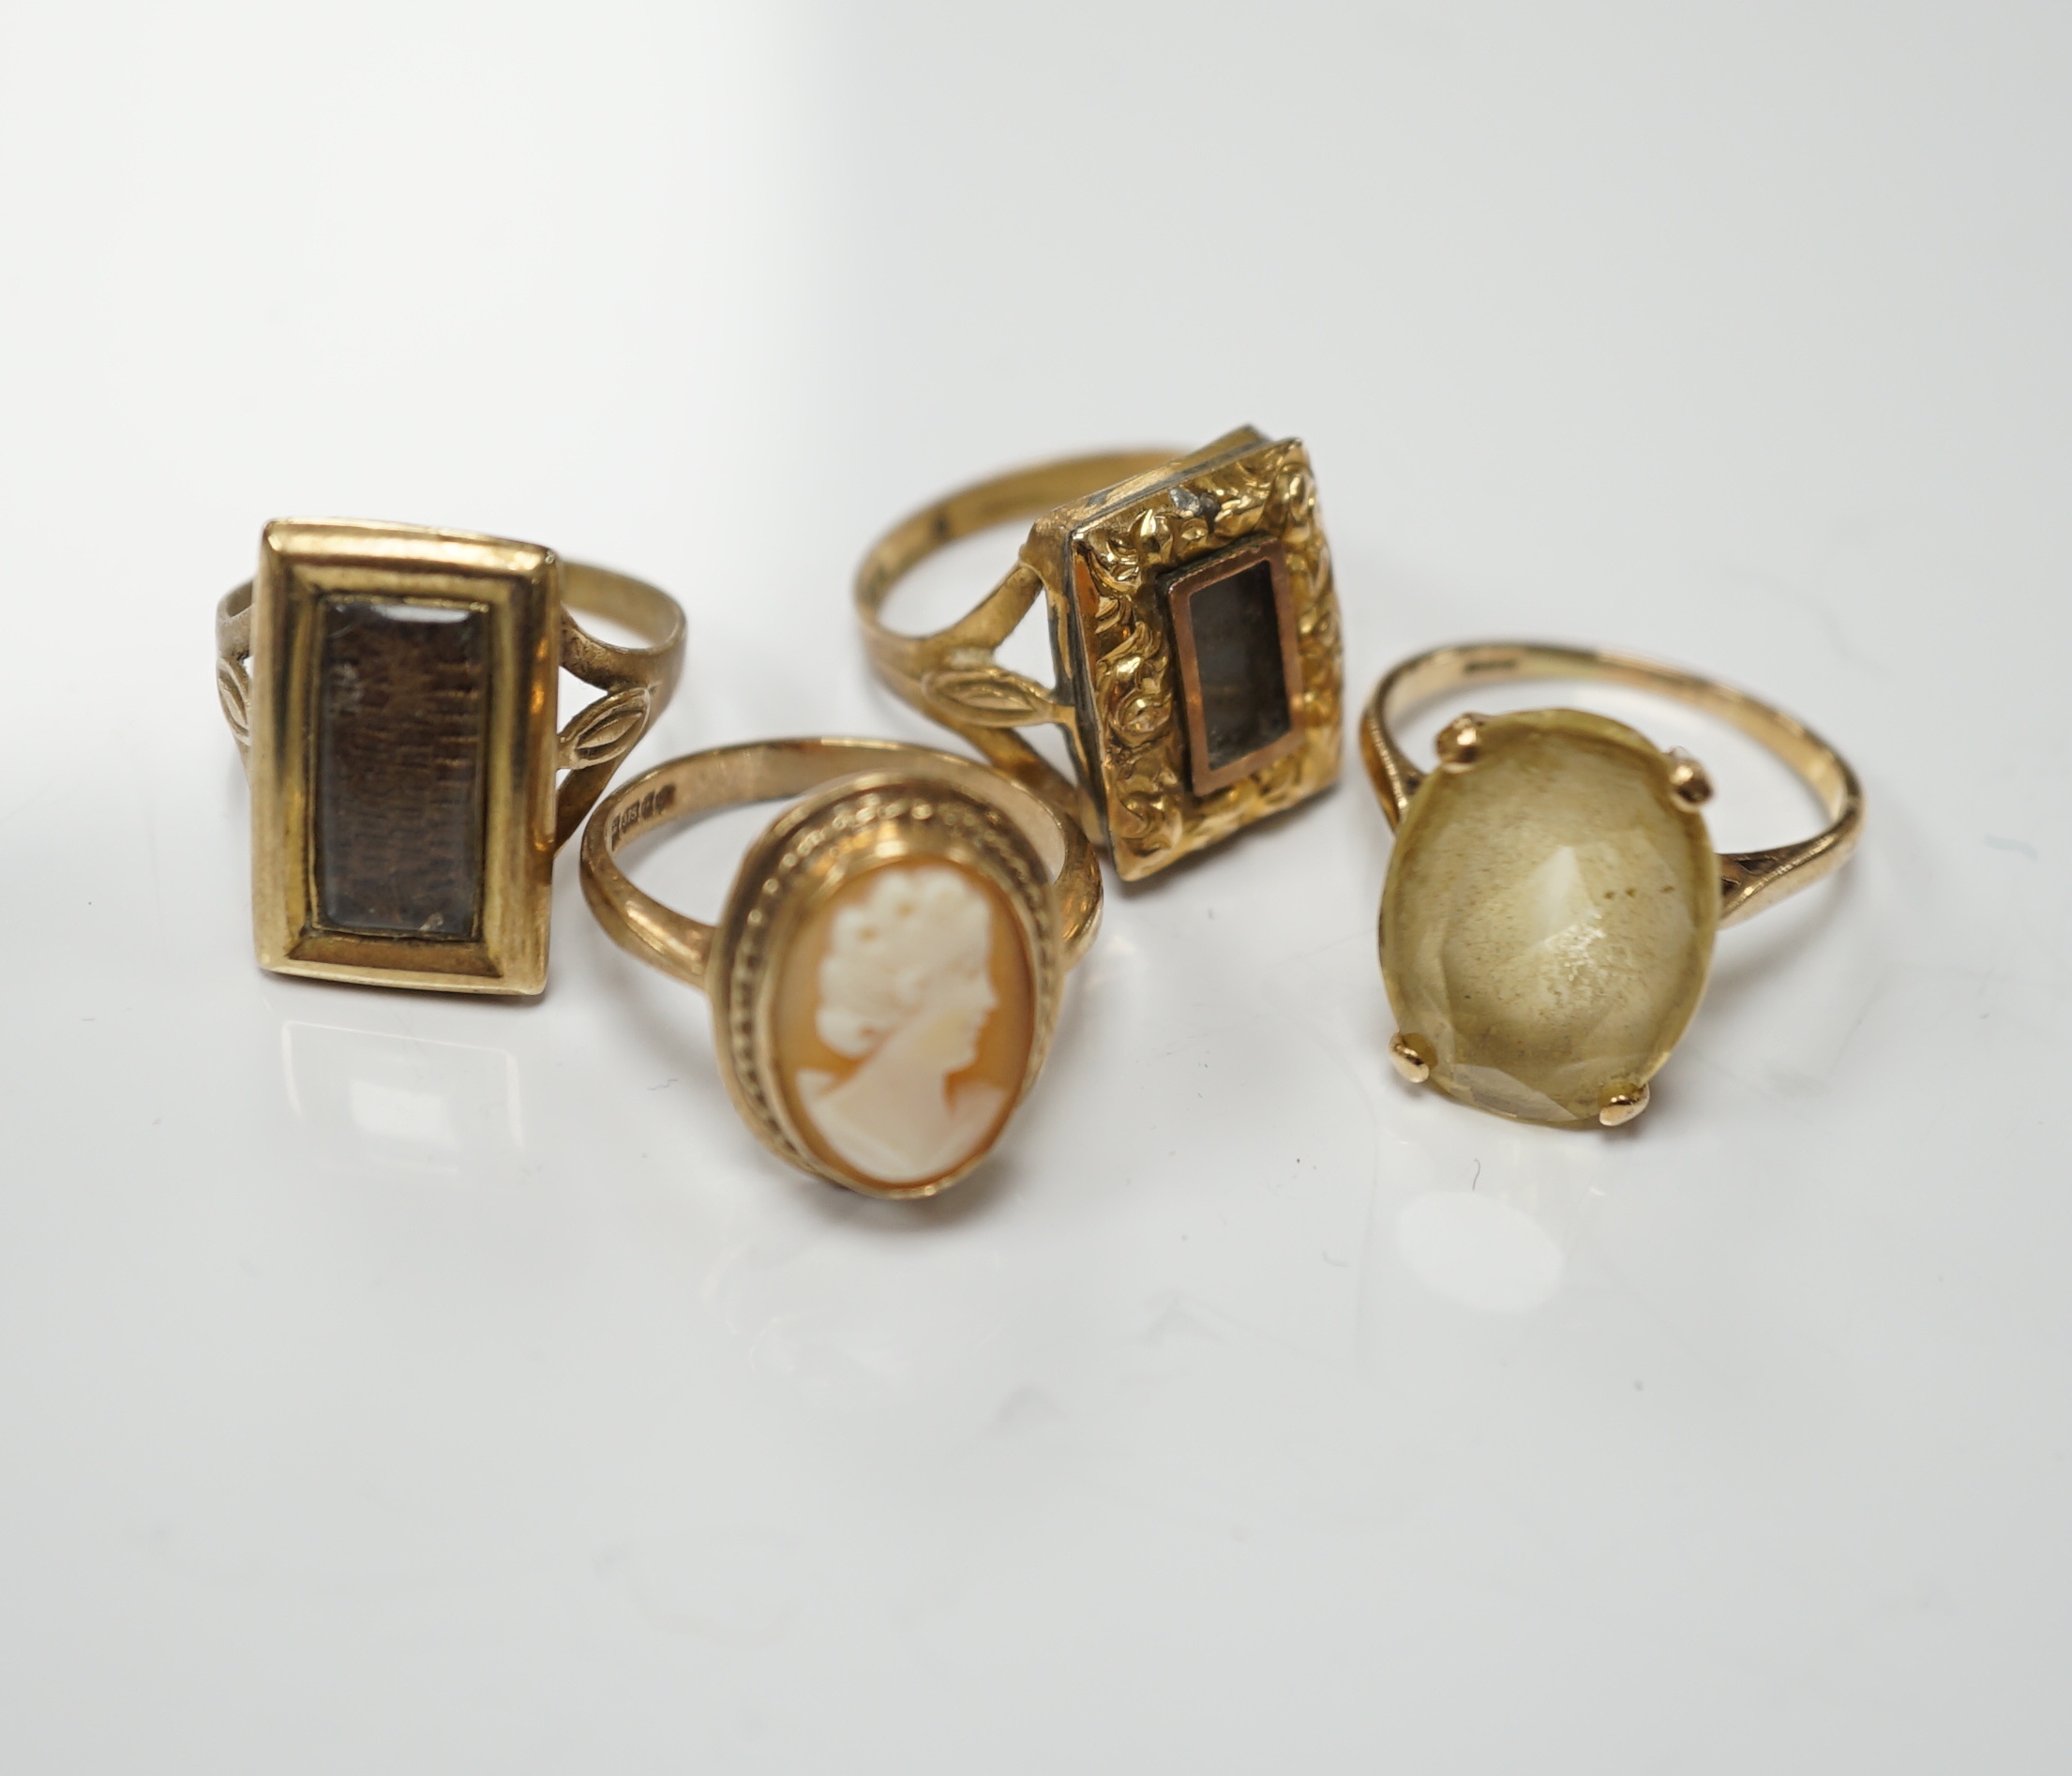 Two 19th century yellow metal mourning brooches, now with shanks converted to dress rings and two other 9ct rings.